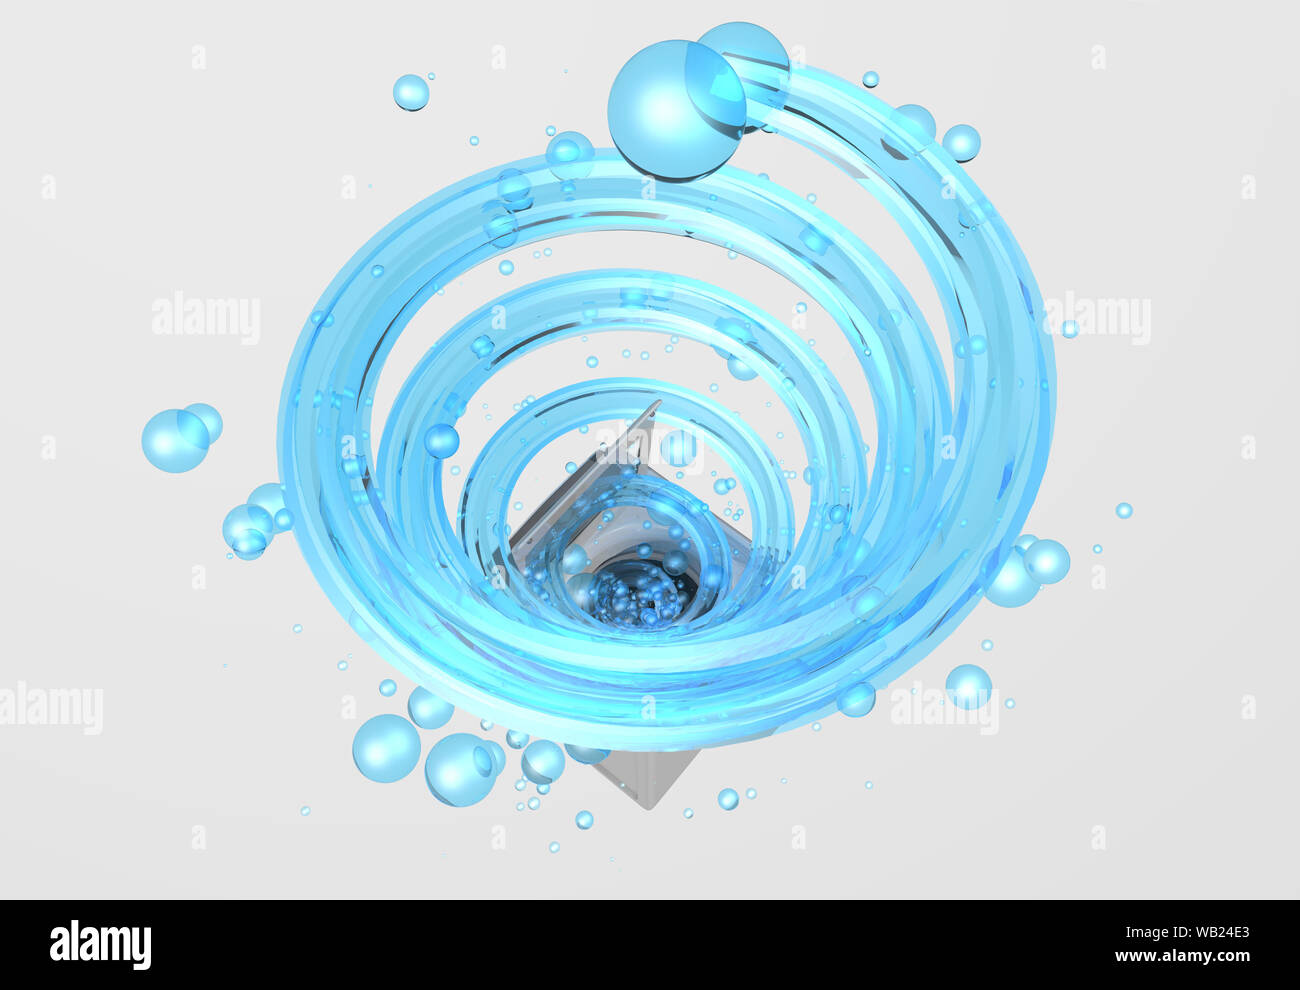 Top view of clothes washing machine with the door open, inside it comes a blue water jet in the form of a spiral with bubbles floating in white backgr Stock Photo